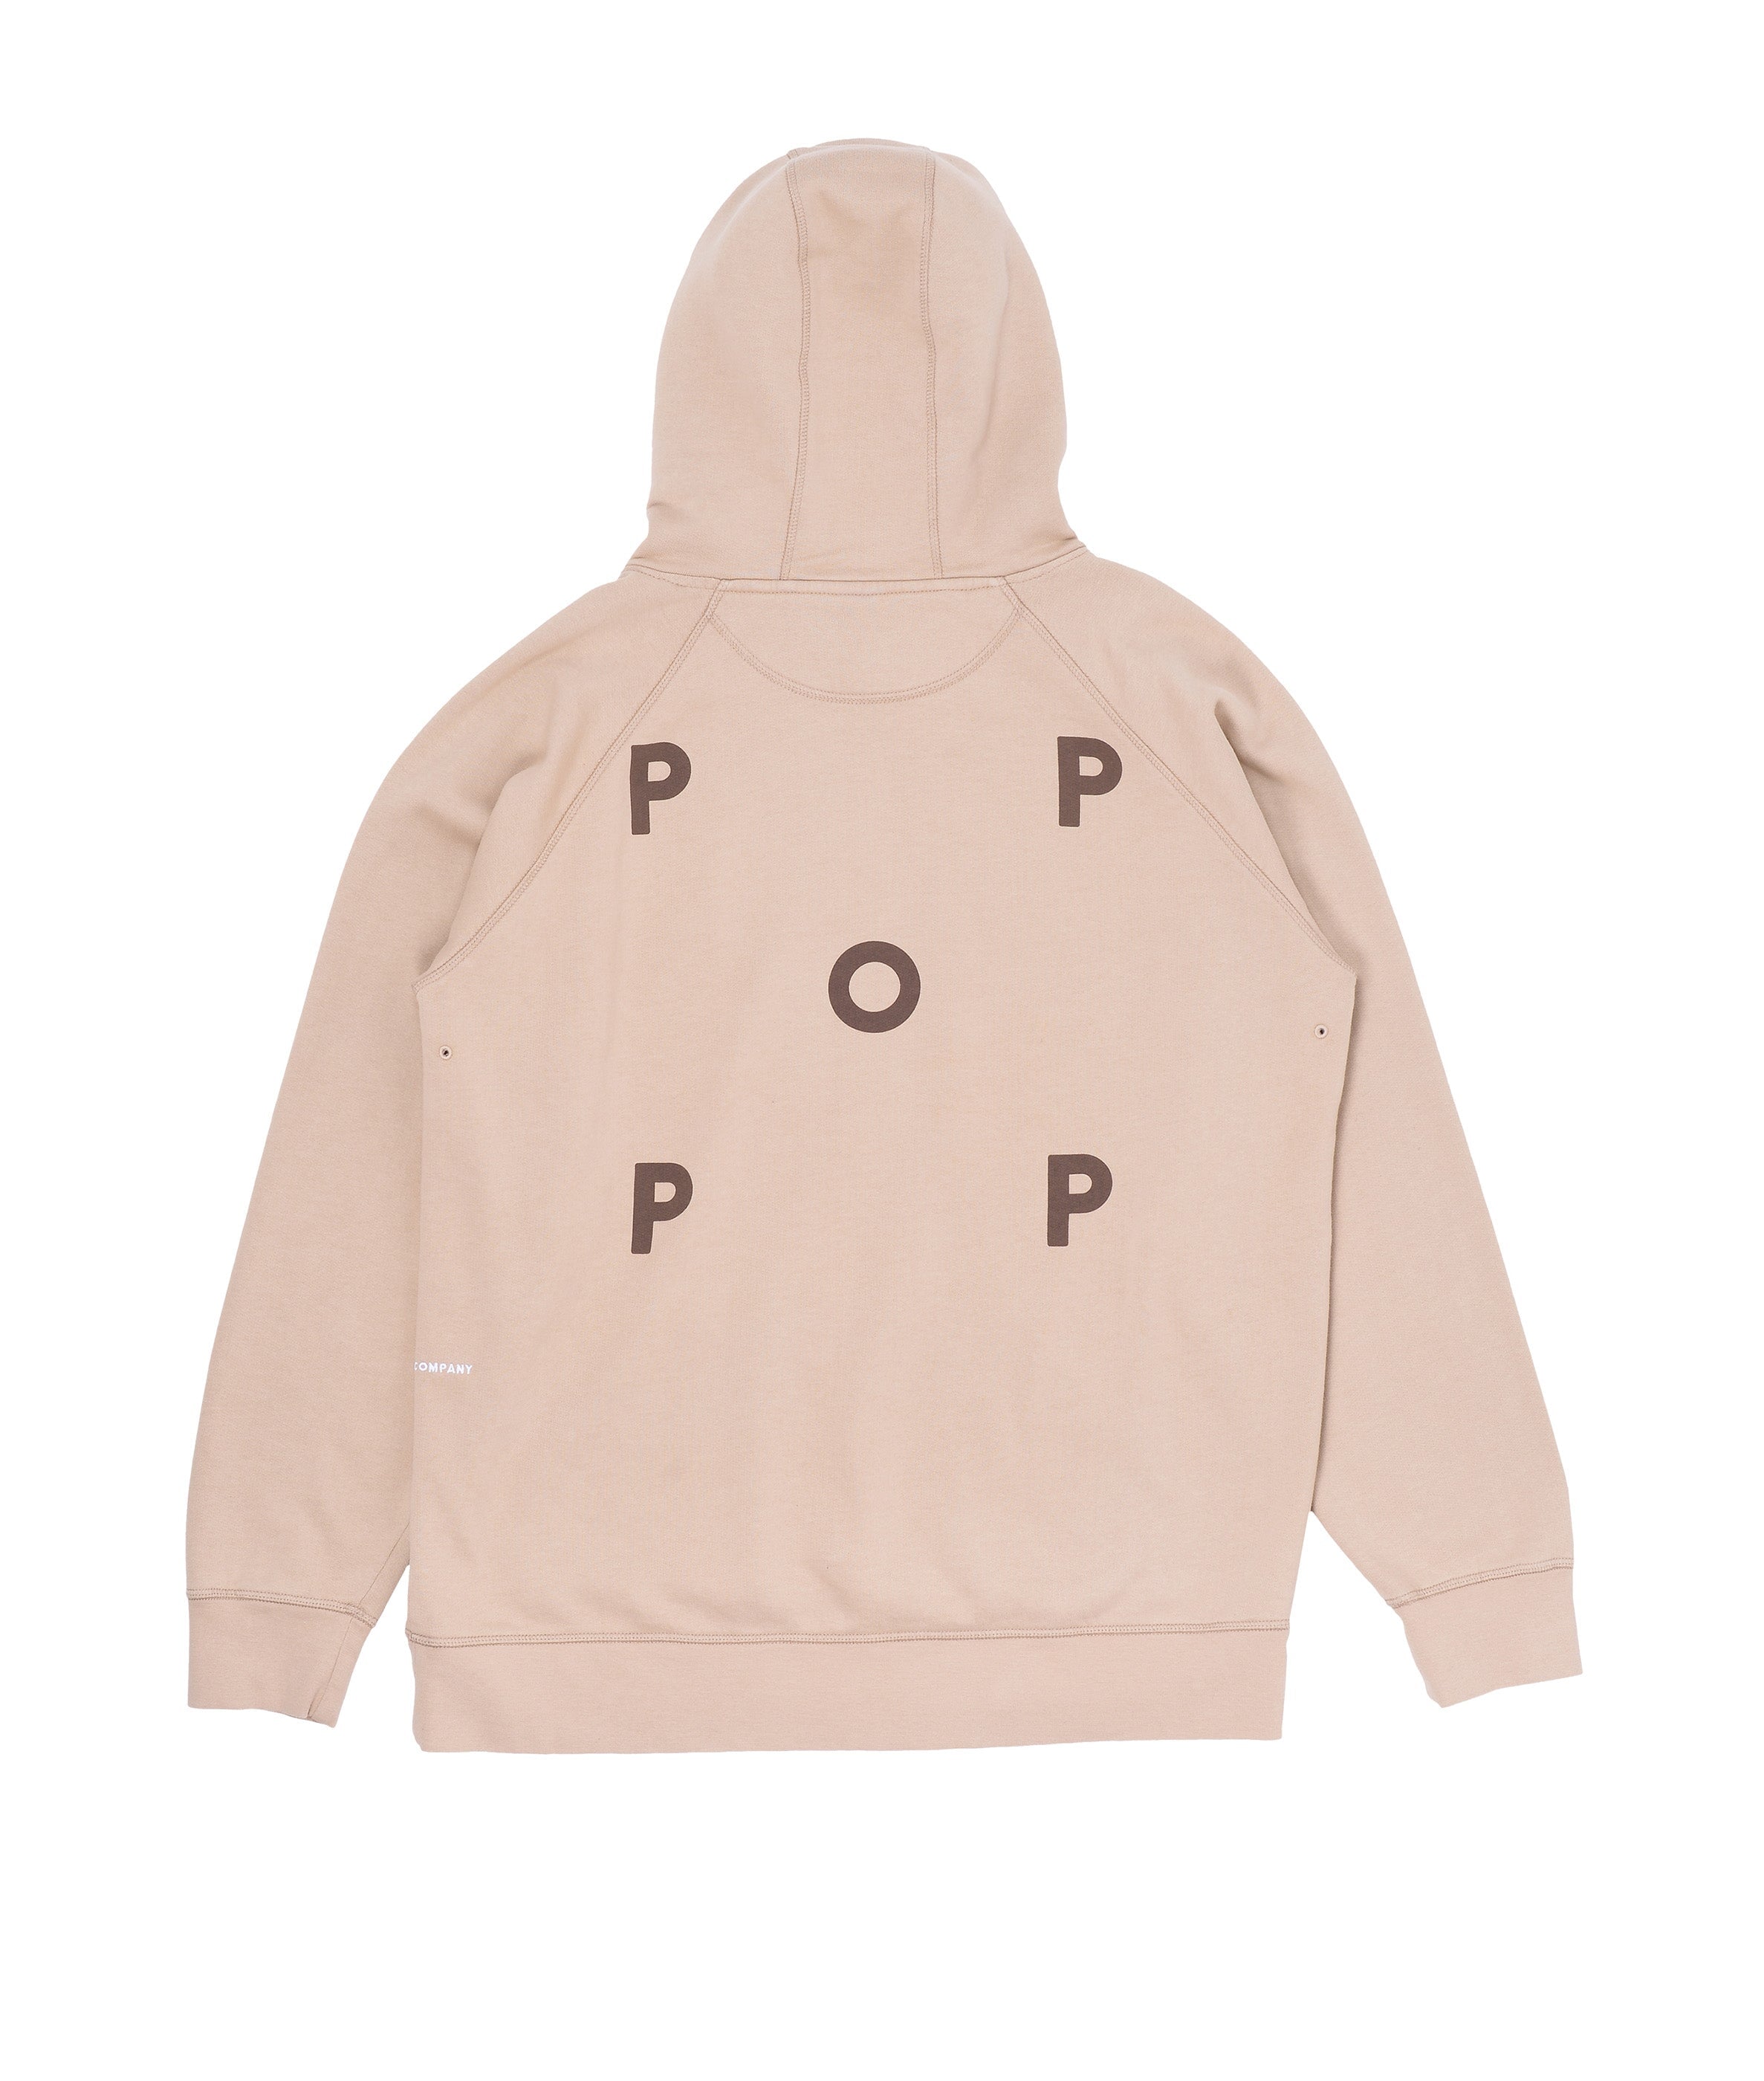 POP Trading Company Logo Hooded Sweater - White Pepper POP Trading Company 